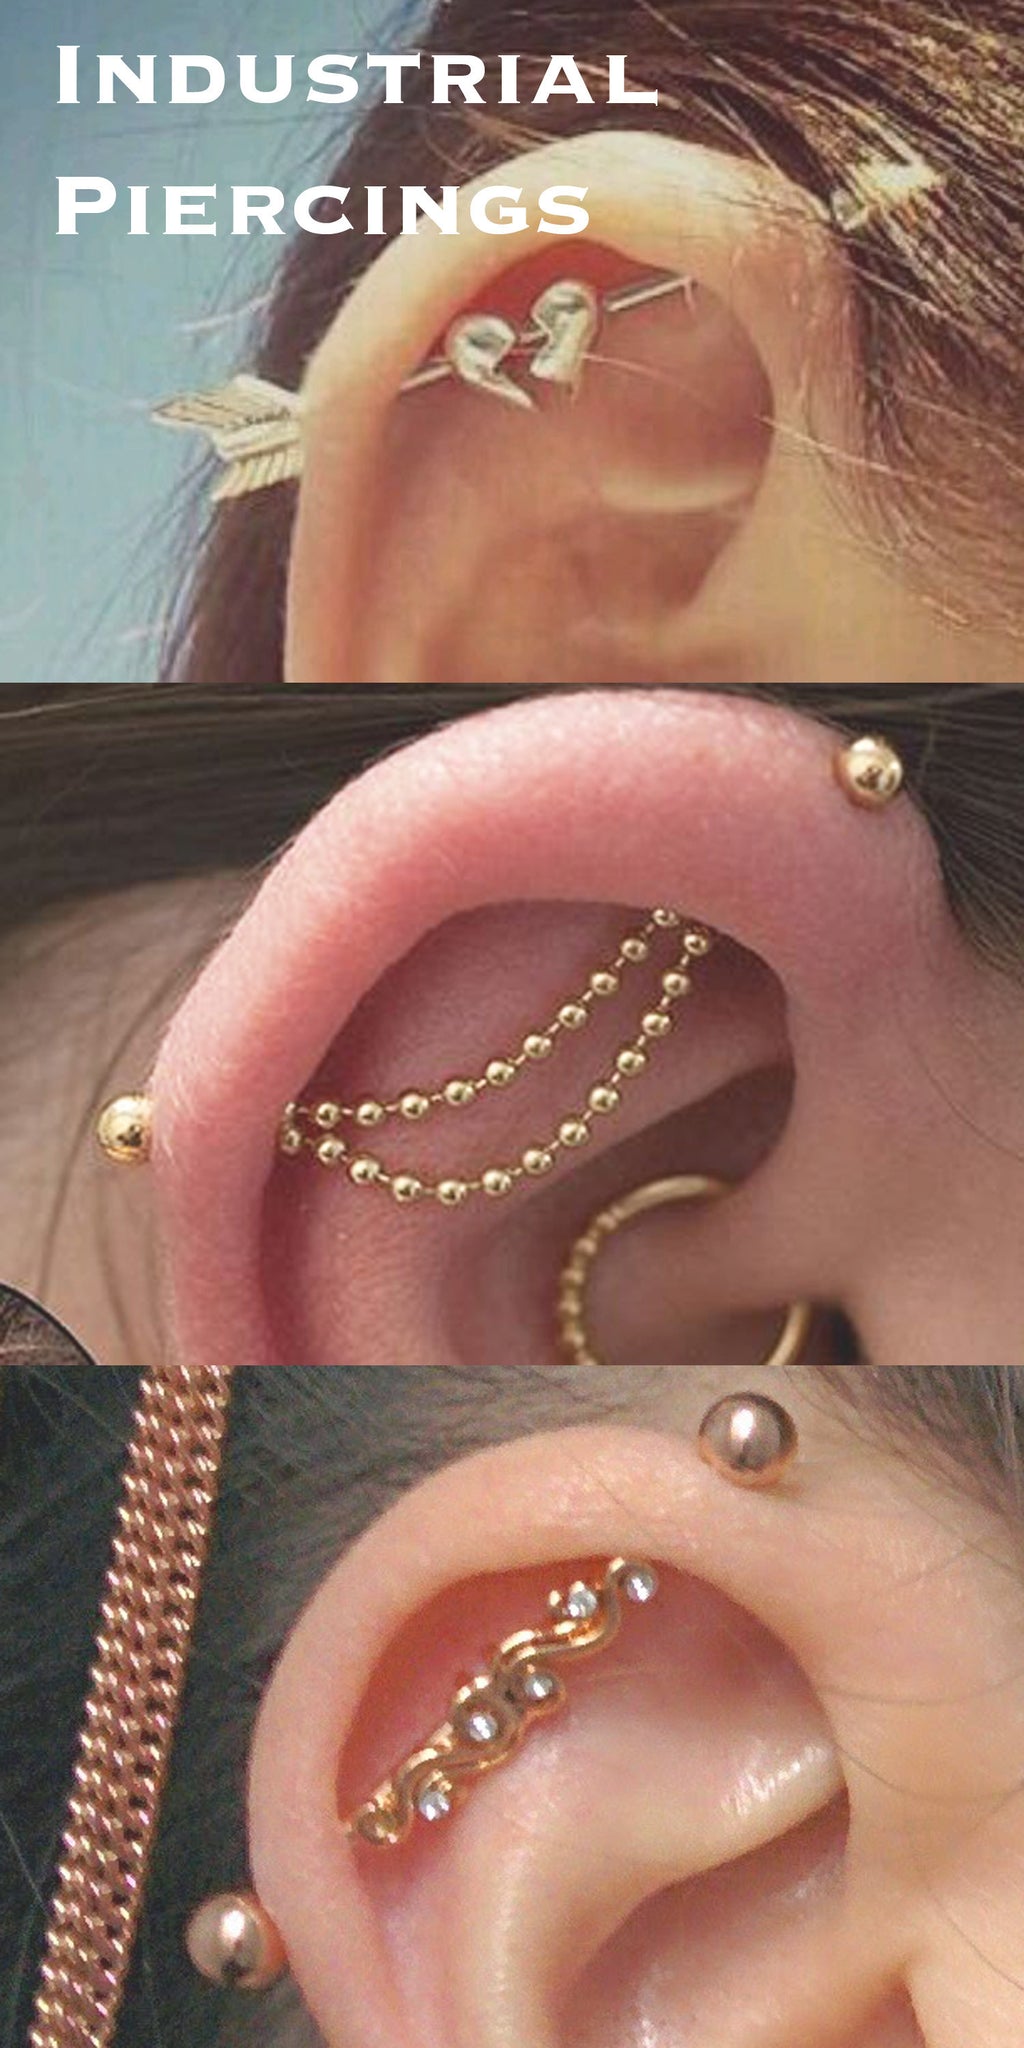 Cool Ear Piercing Ideas at MyBodiArt.com - Industrial Piercing Jewelry Kylie Jenner Unique 14G